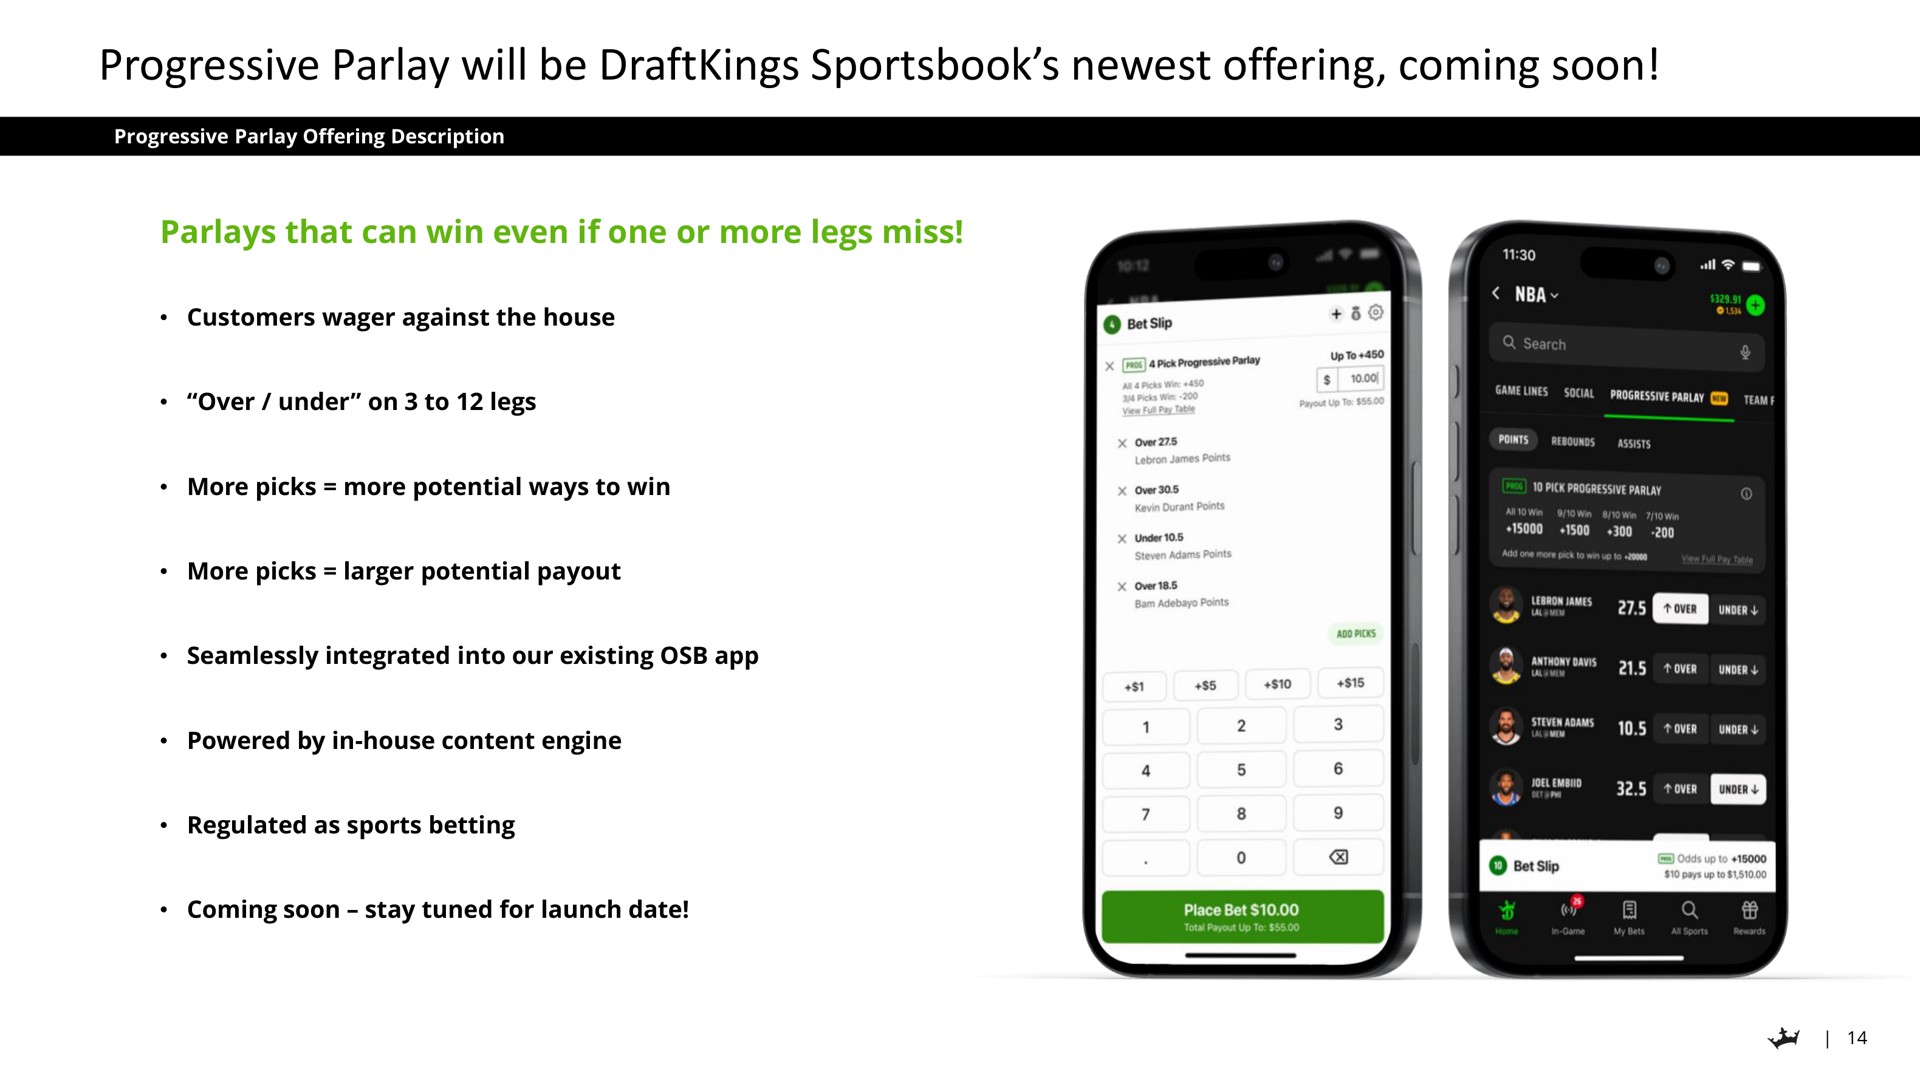 progressive parlay will be offering coming soon | DraftKings